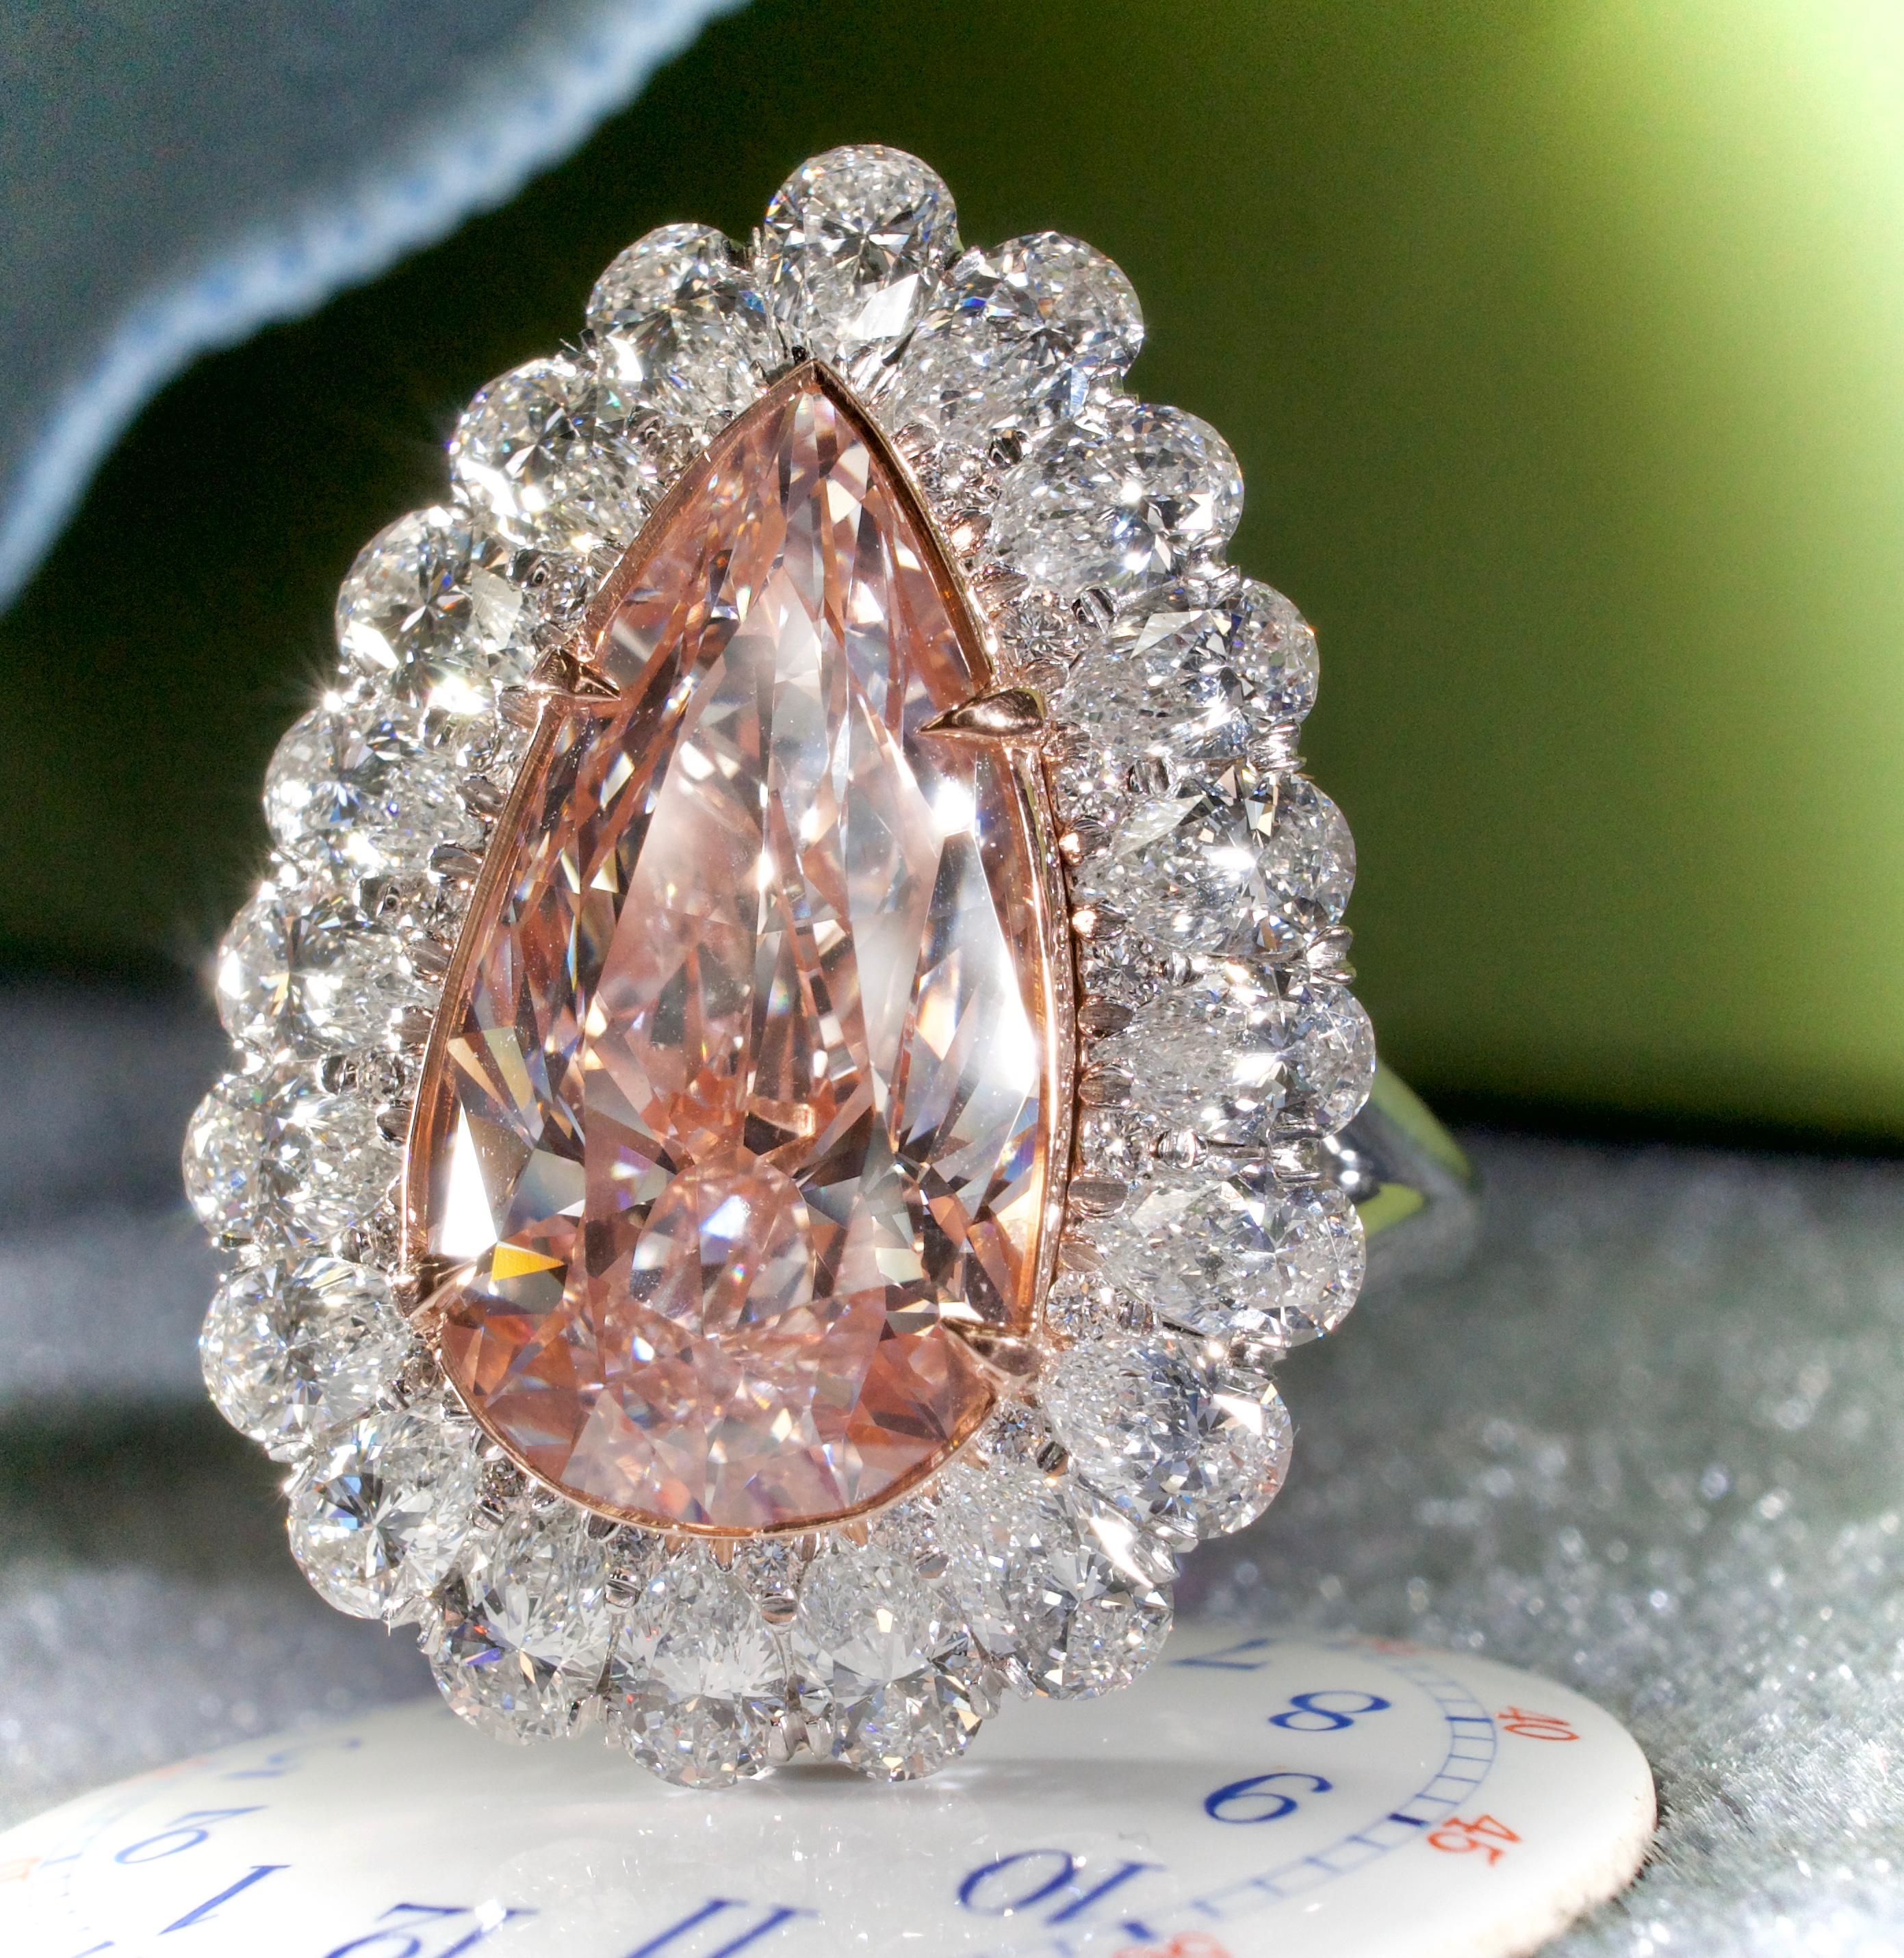 'THE ROSE DIAMOND' is an extraordinary natural pink pear shaped diamond ring. The Pink diamond is certified with a GIA certificate; no.5182332500, which also includes a GIA Type IIa certificate. Type 11a diamonds are the most chemically pure